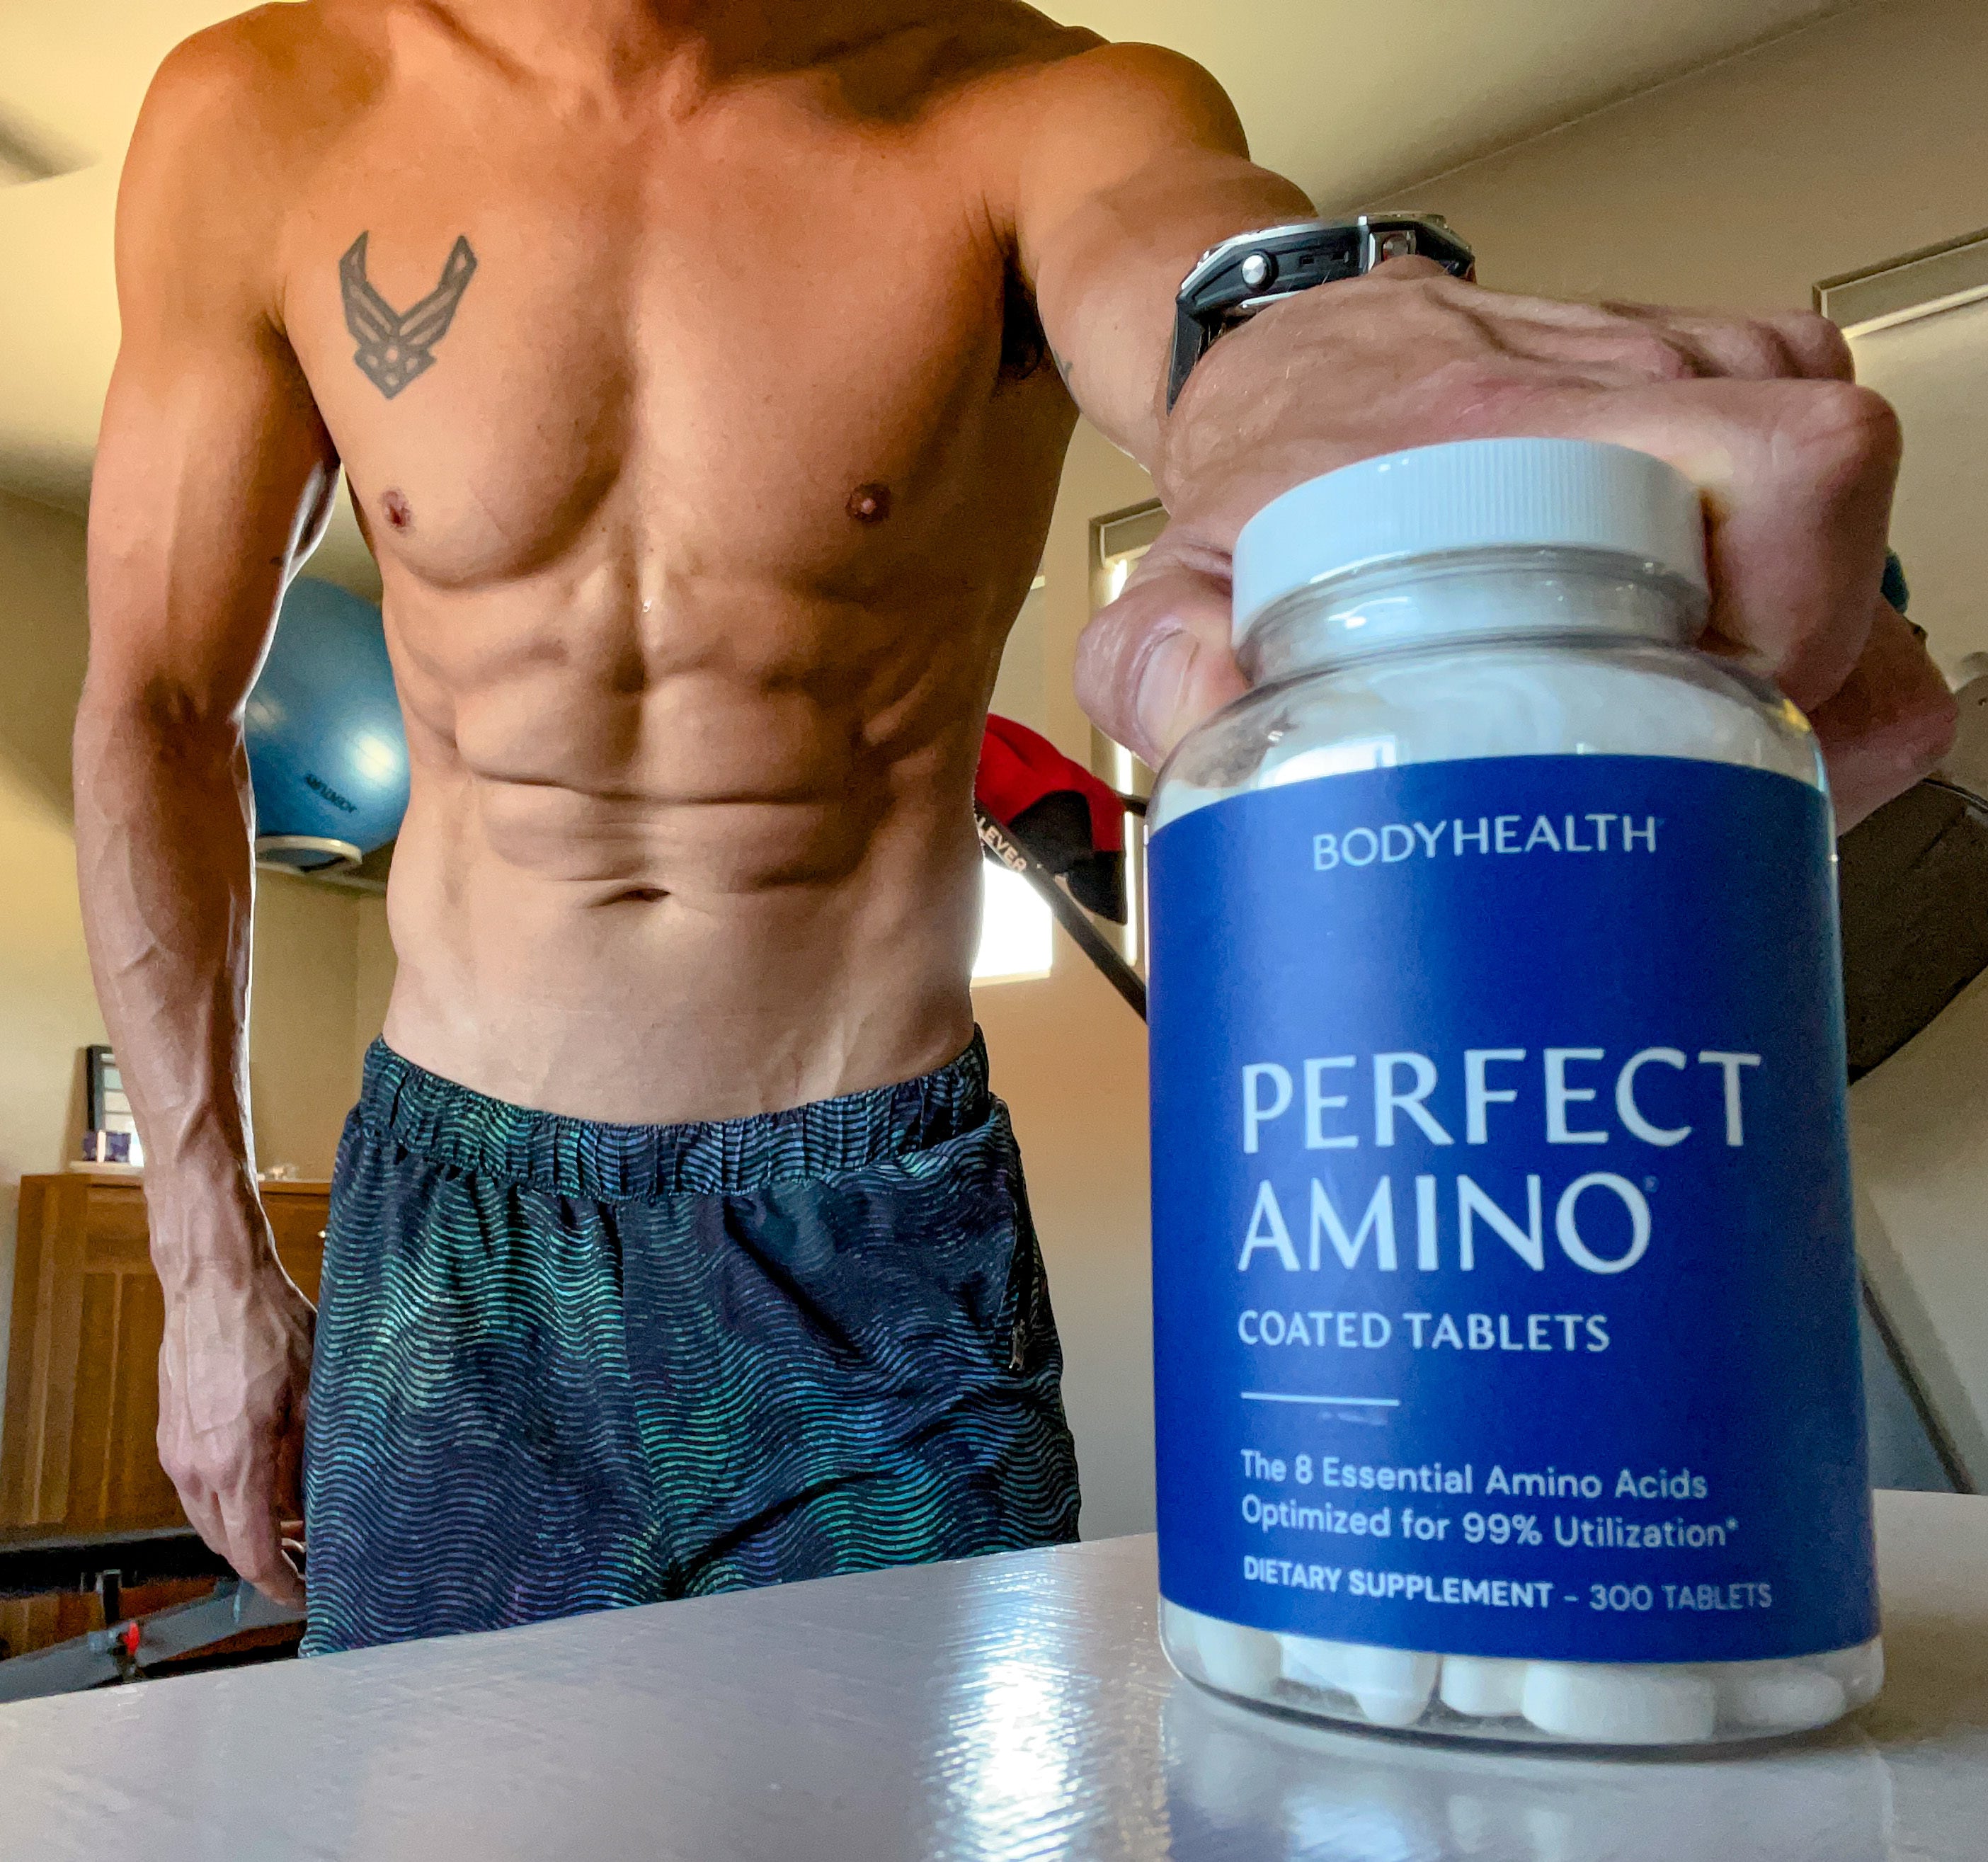 BodyHealth male Influencer holding PerfectAmino bottle of tablets for toned and lean muscle